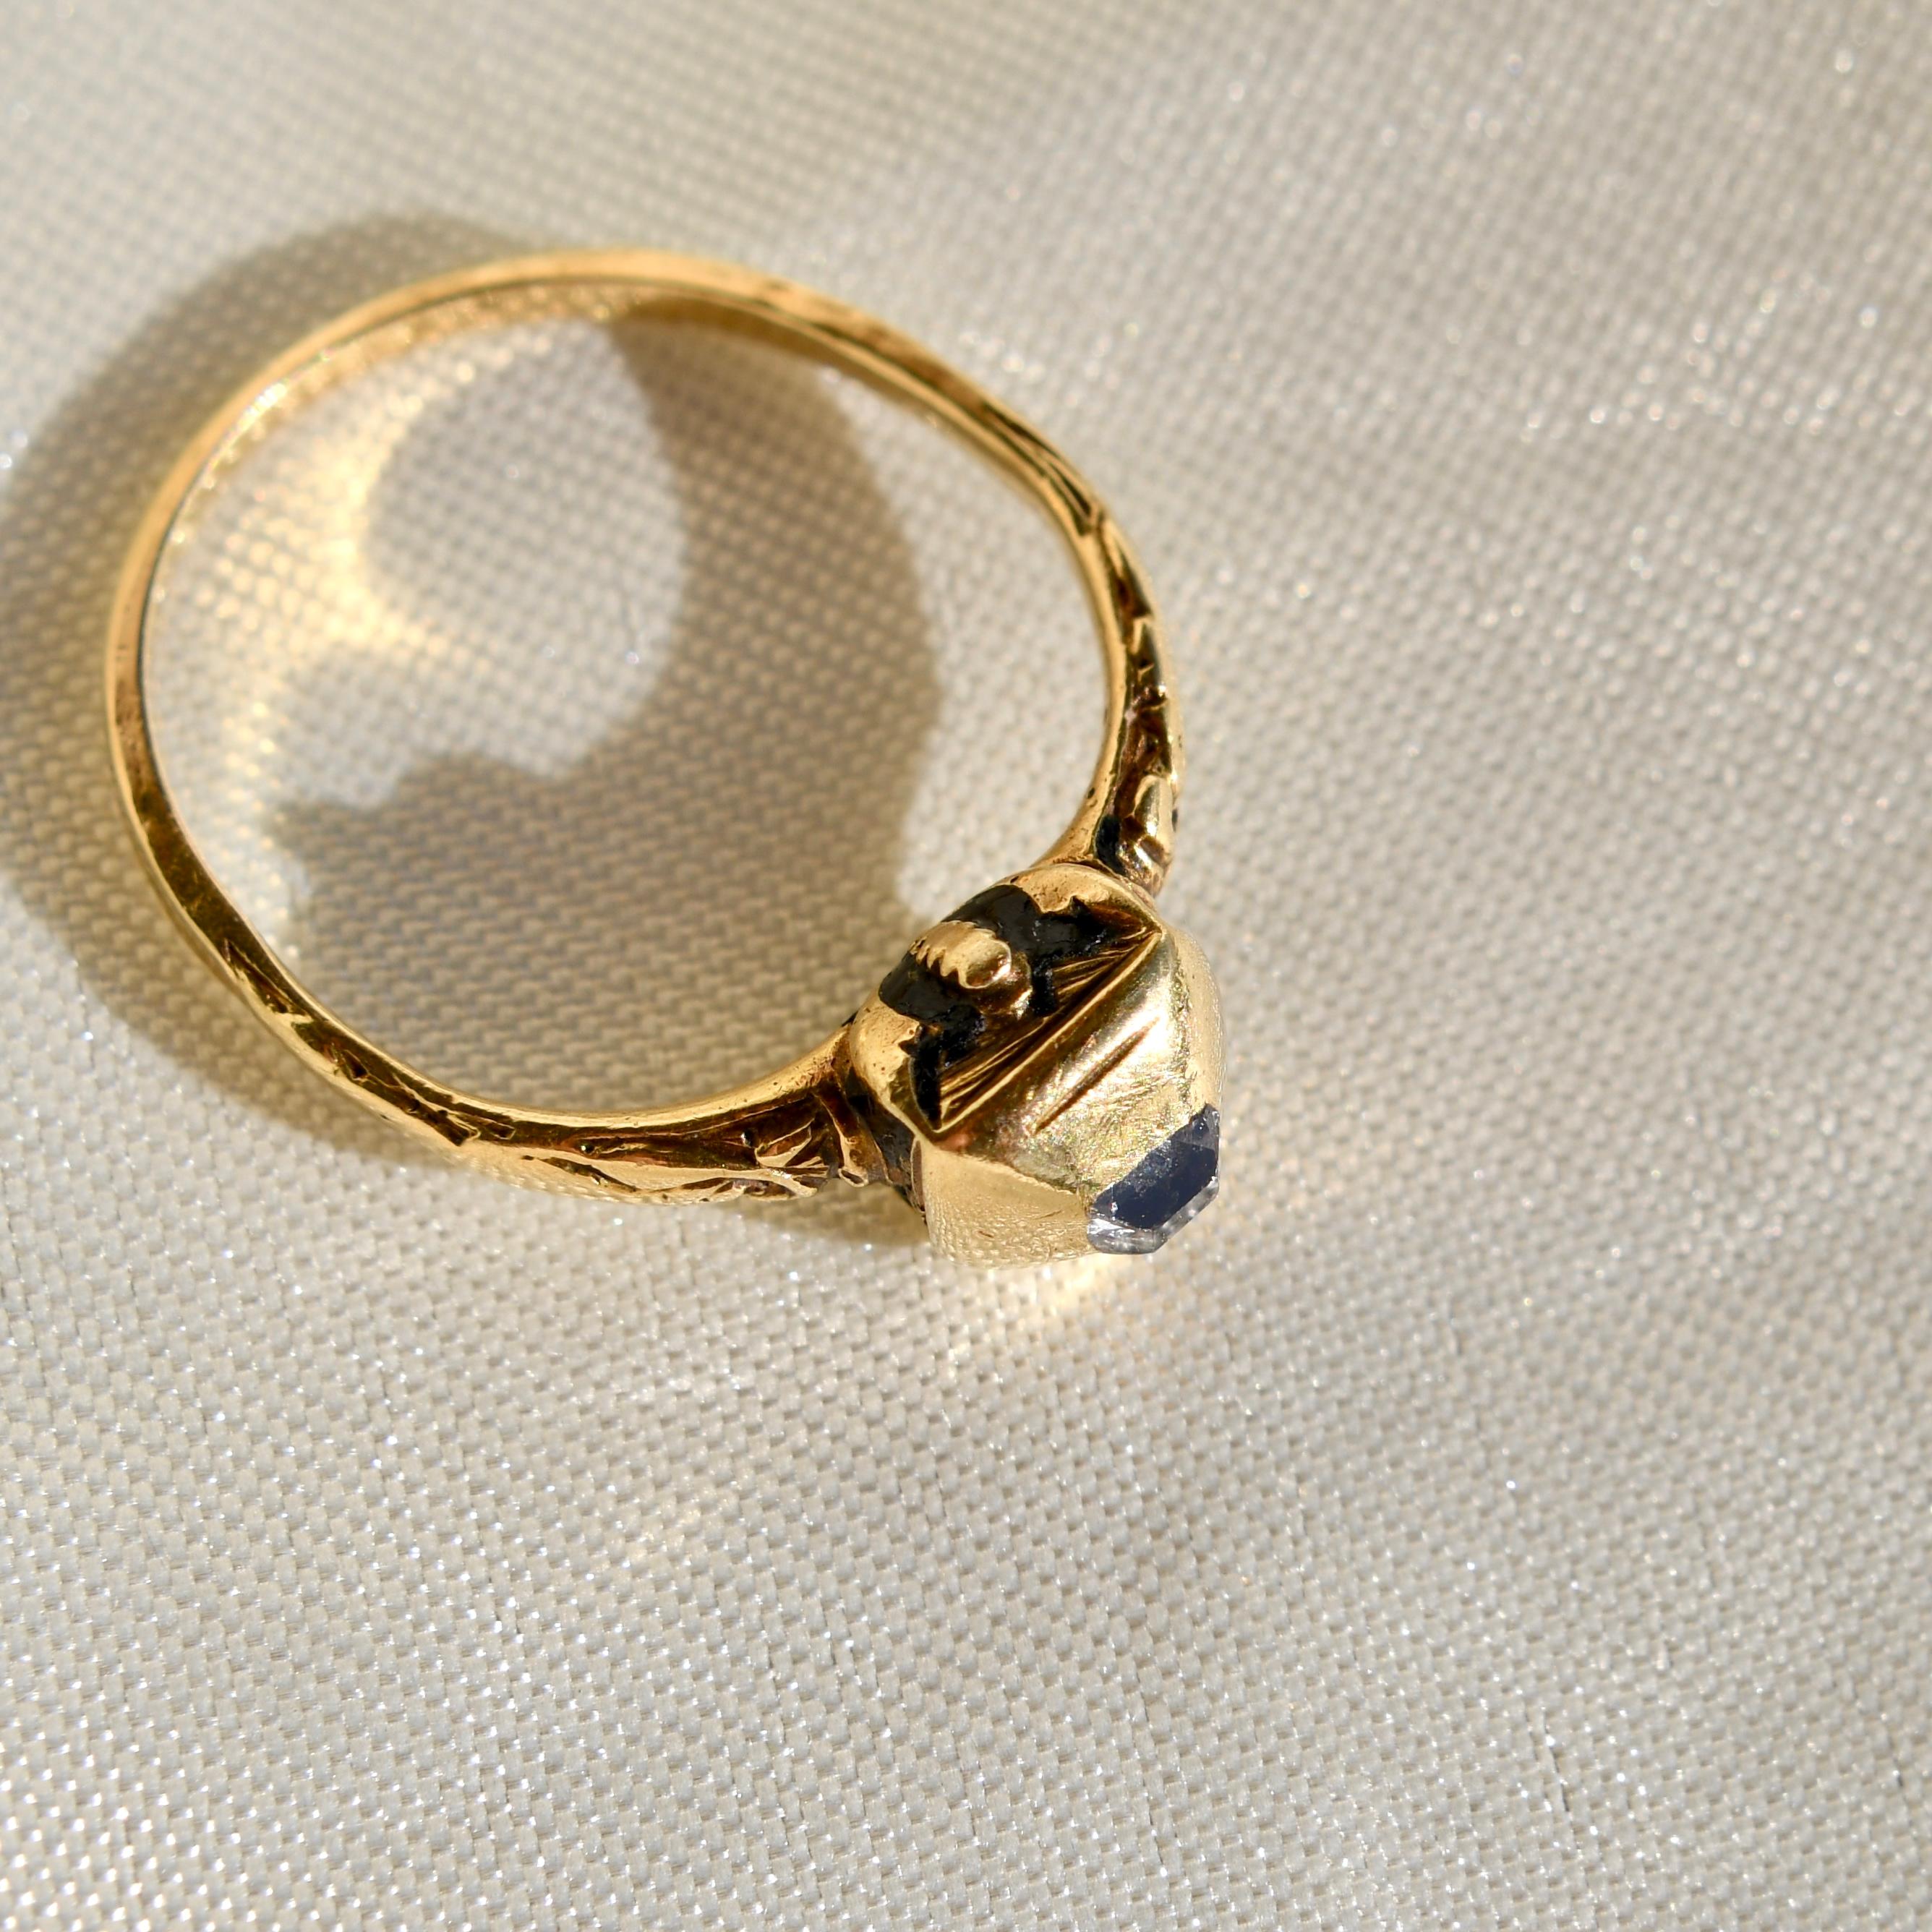 Renaissance gold and diamond ring with enamel, 16th century  3